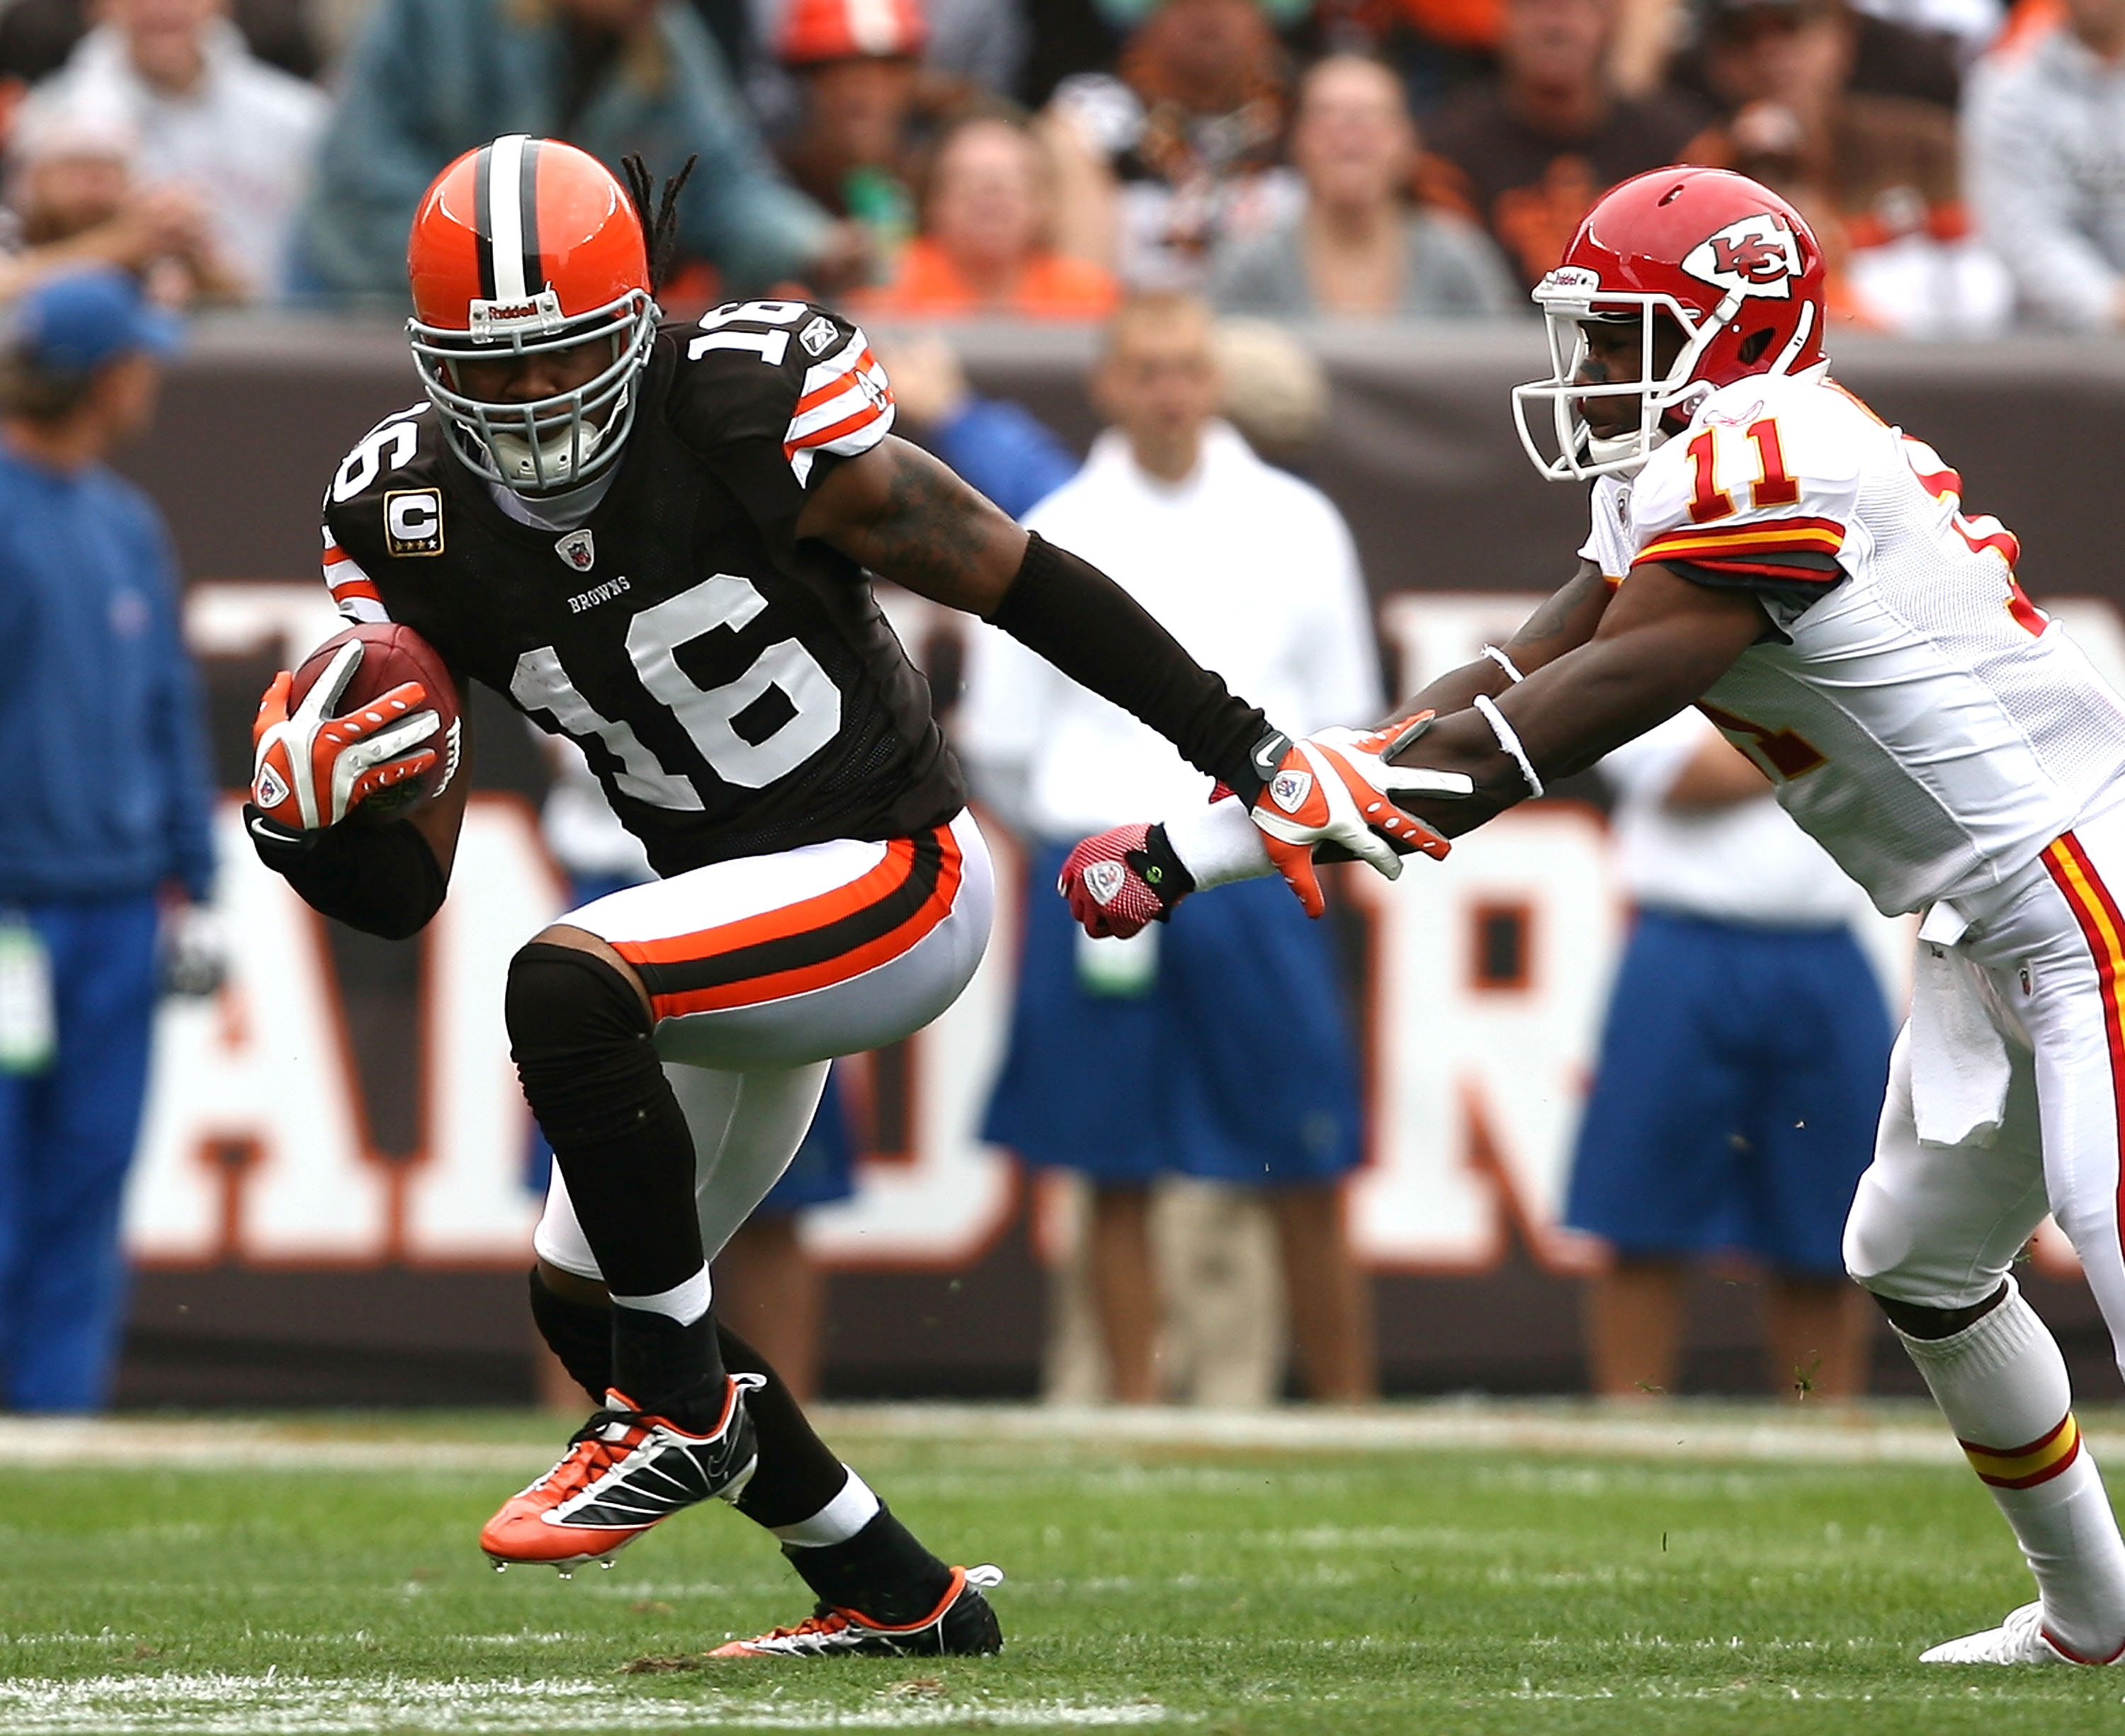 CLEVELAND - SEPTEMBER 19:  Wide receiver Joshua Cribbs #16 of the Cleveland Browns runs by wide receiver Jeremy Horne #11 of the Kansas City Chiefs at Cleveland Browns Stadium on September 19, 2010 in Cleveland, Ohio.  (Photo by Matt Sullivan/Getty Images